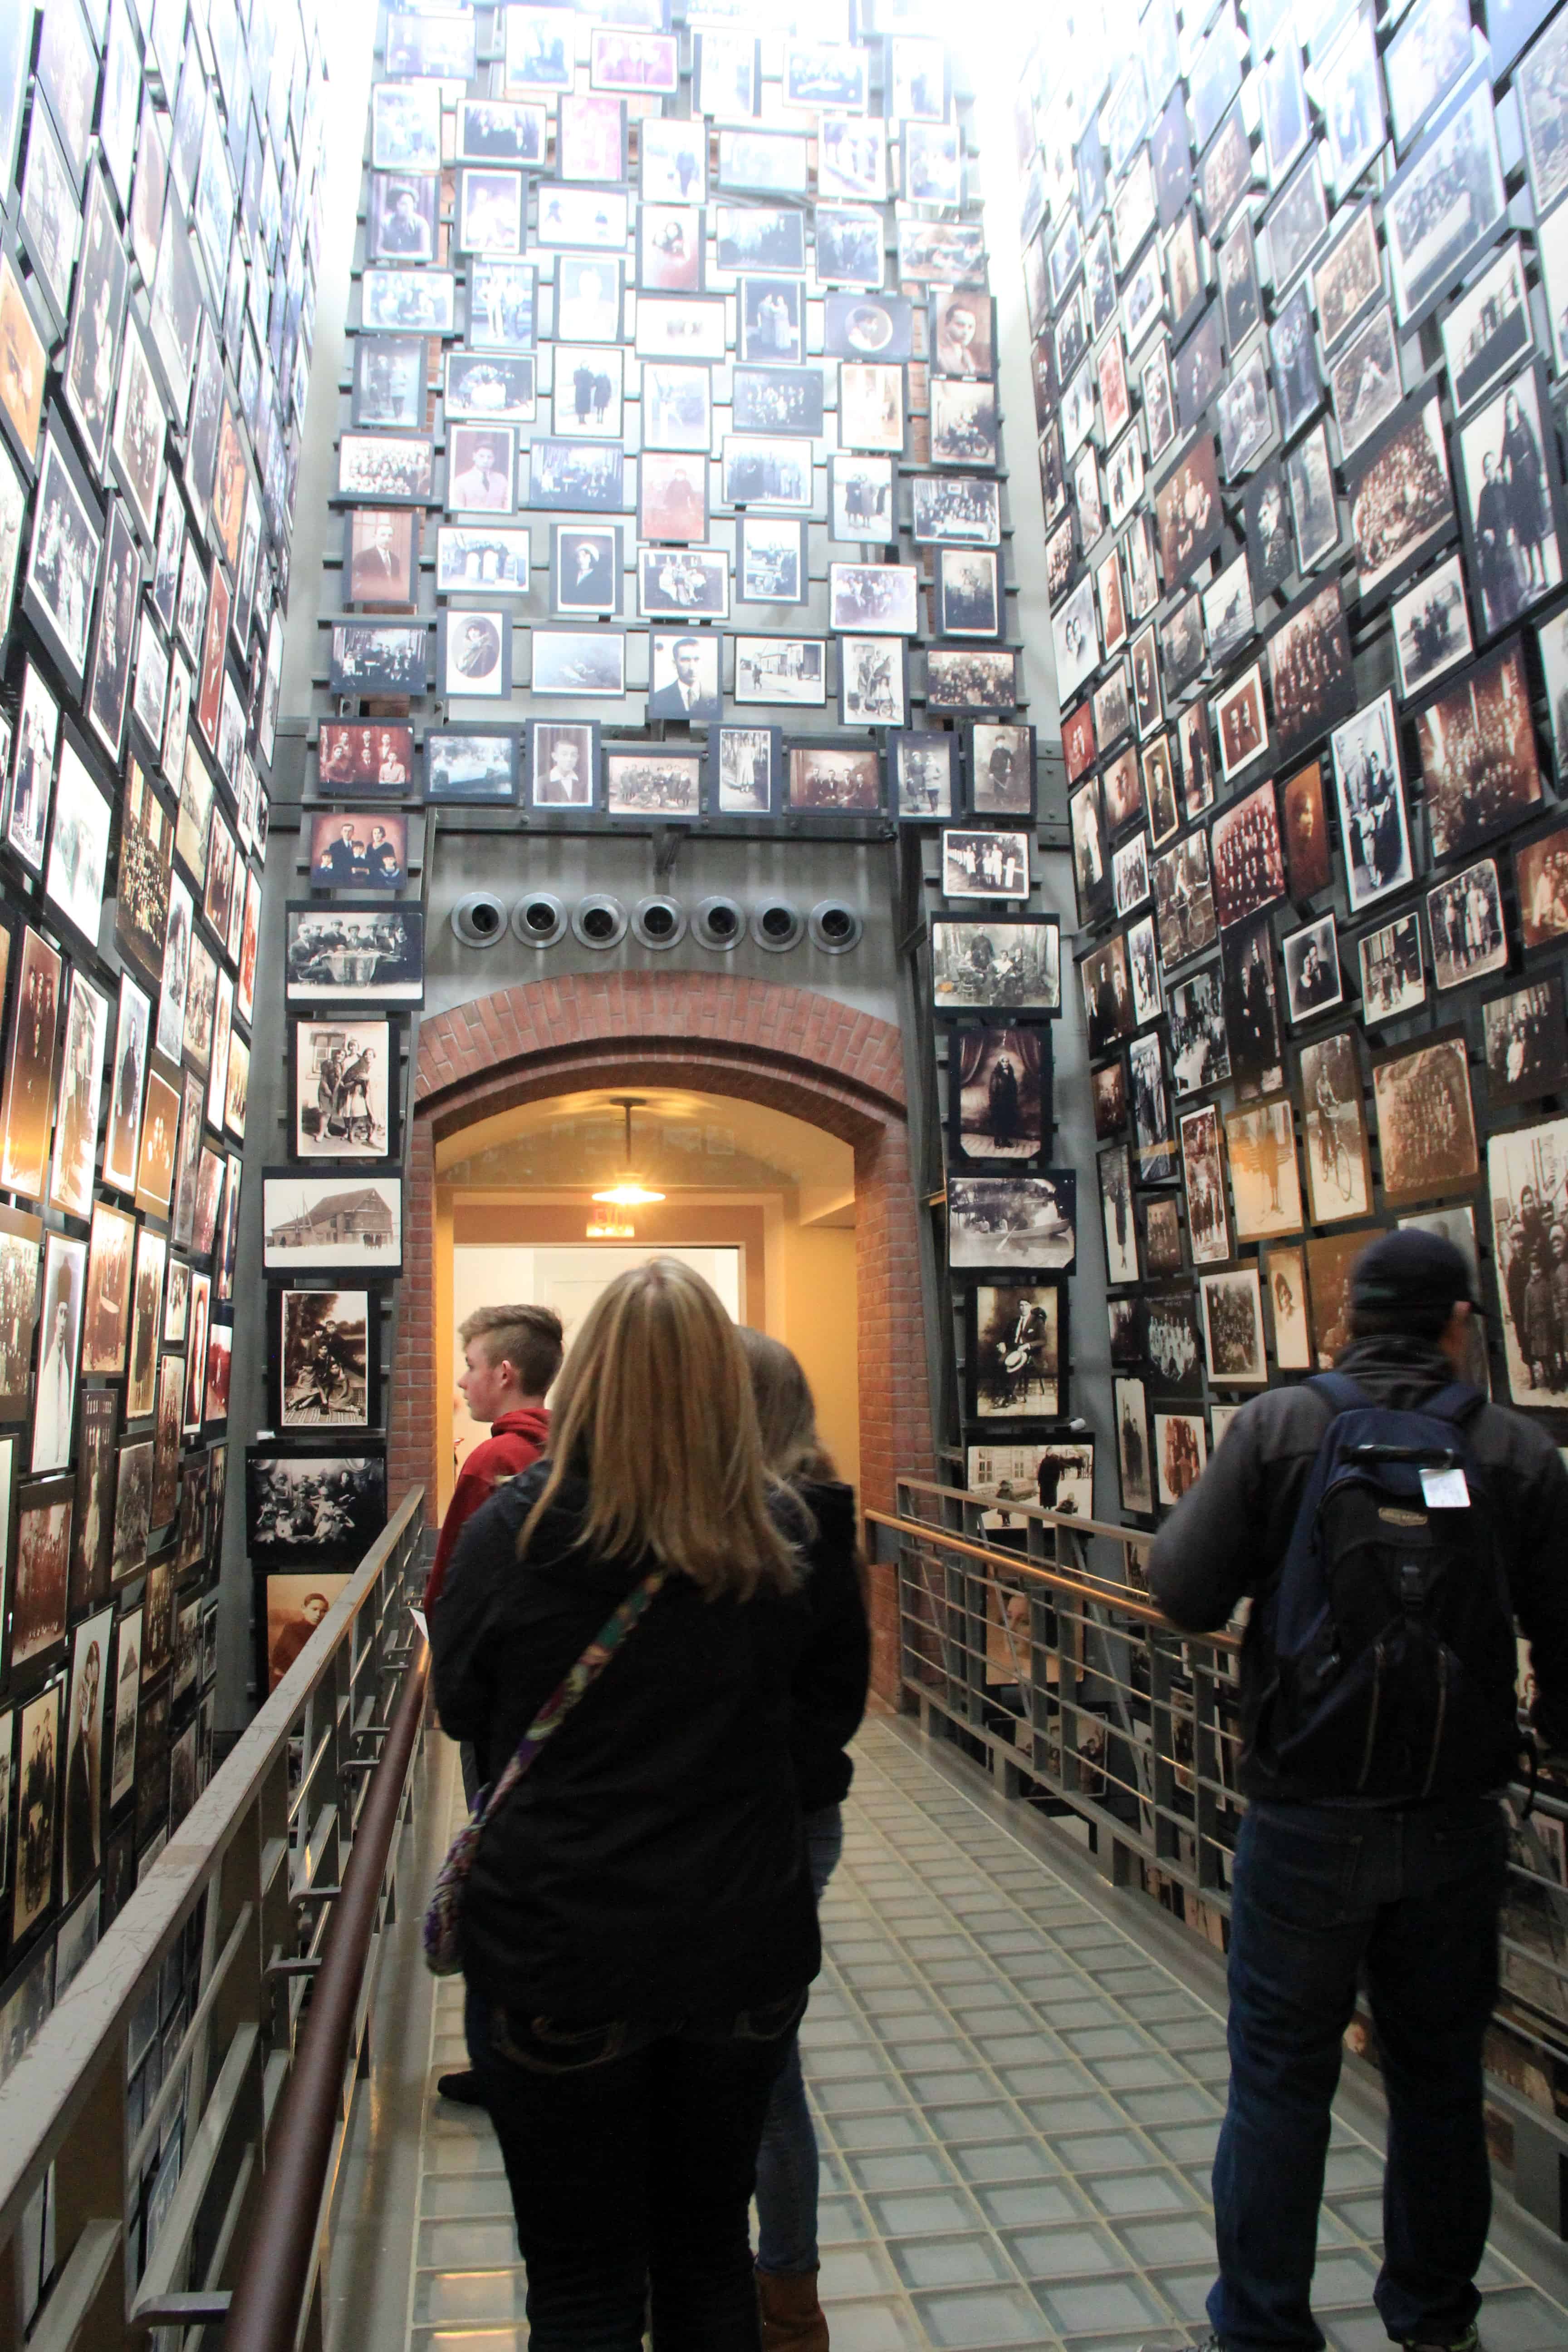 Thousands of Families destroyed The United States Holocaust Memorial Museum